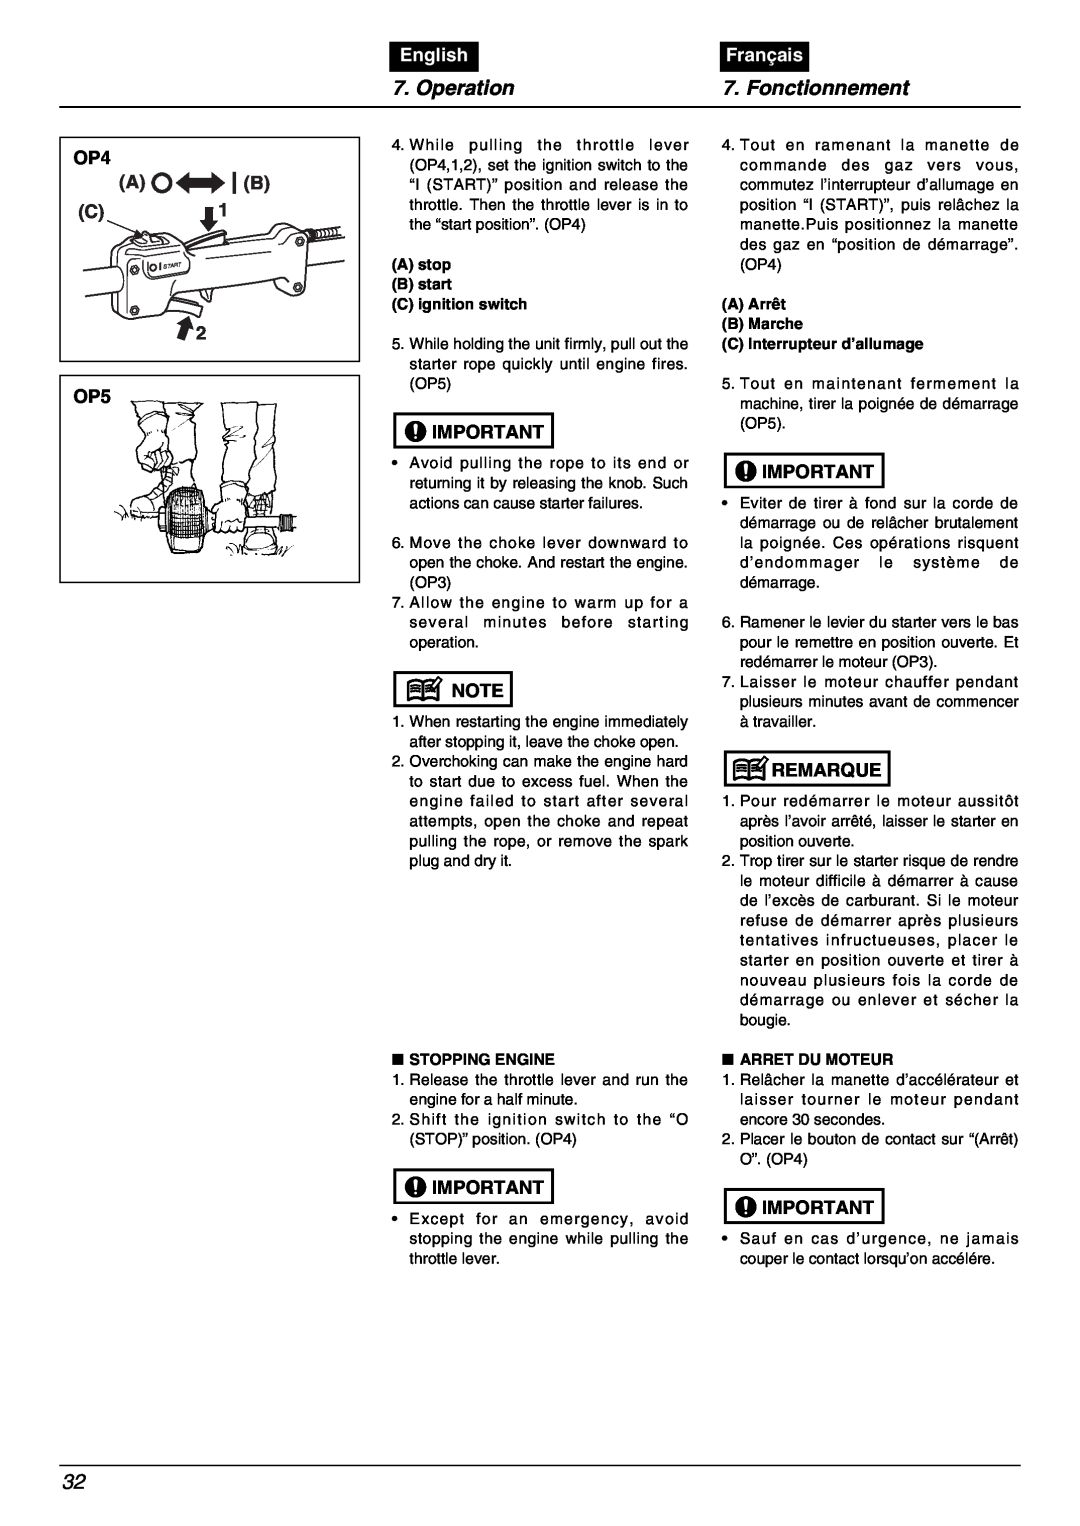 Zenoah BC2000 manual Operation, Fonctionnement, English, Français, A stop B start C ignition switch, Stopping Engine 